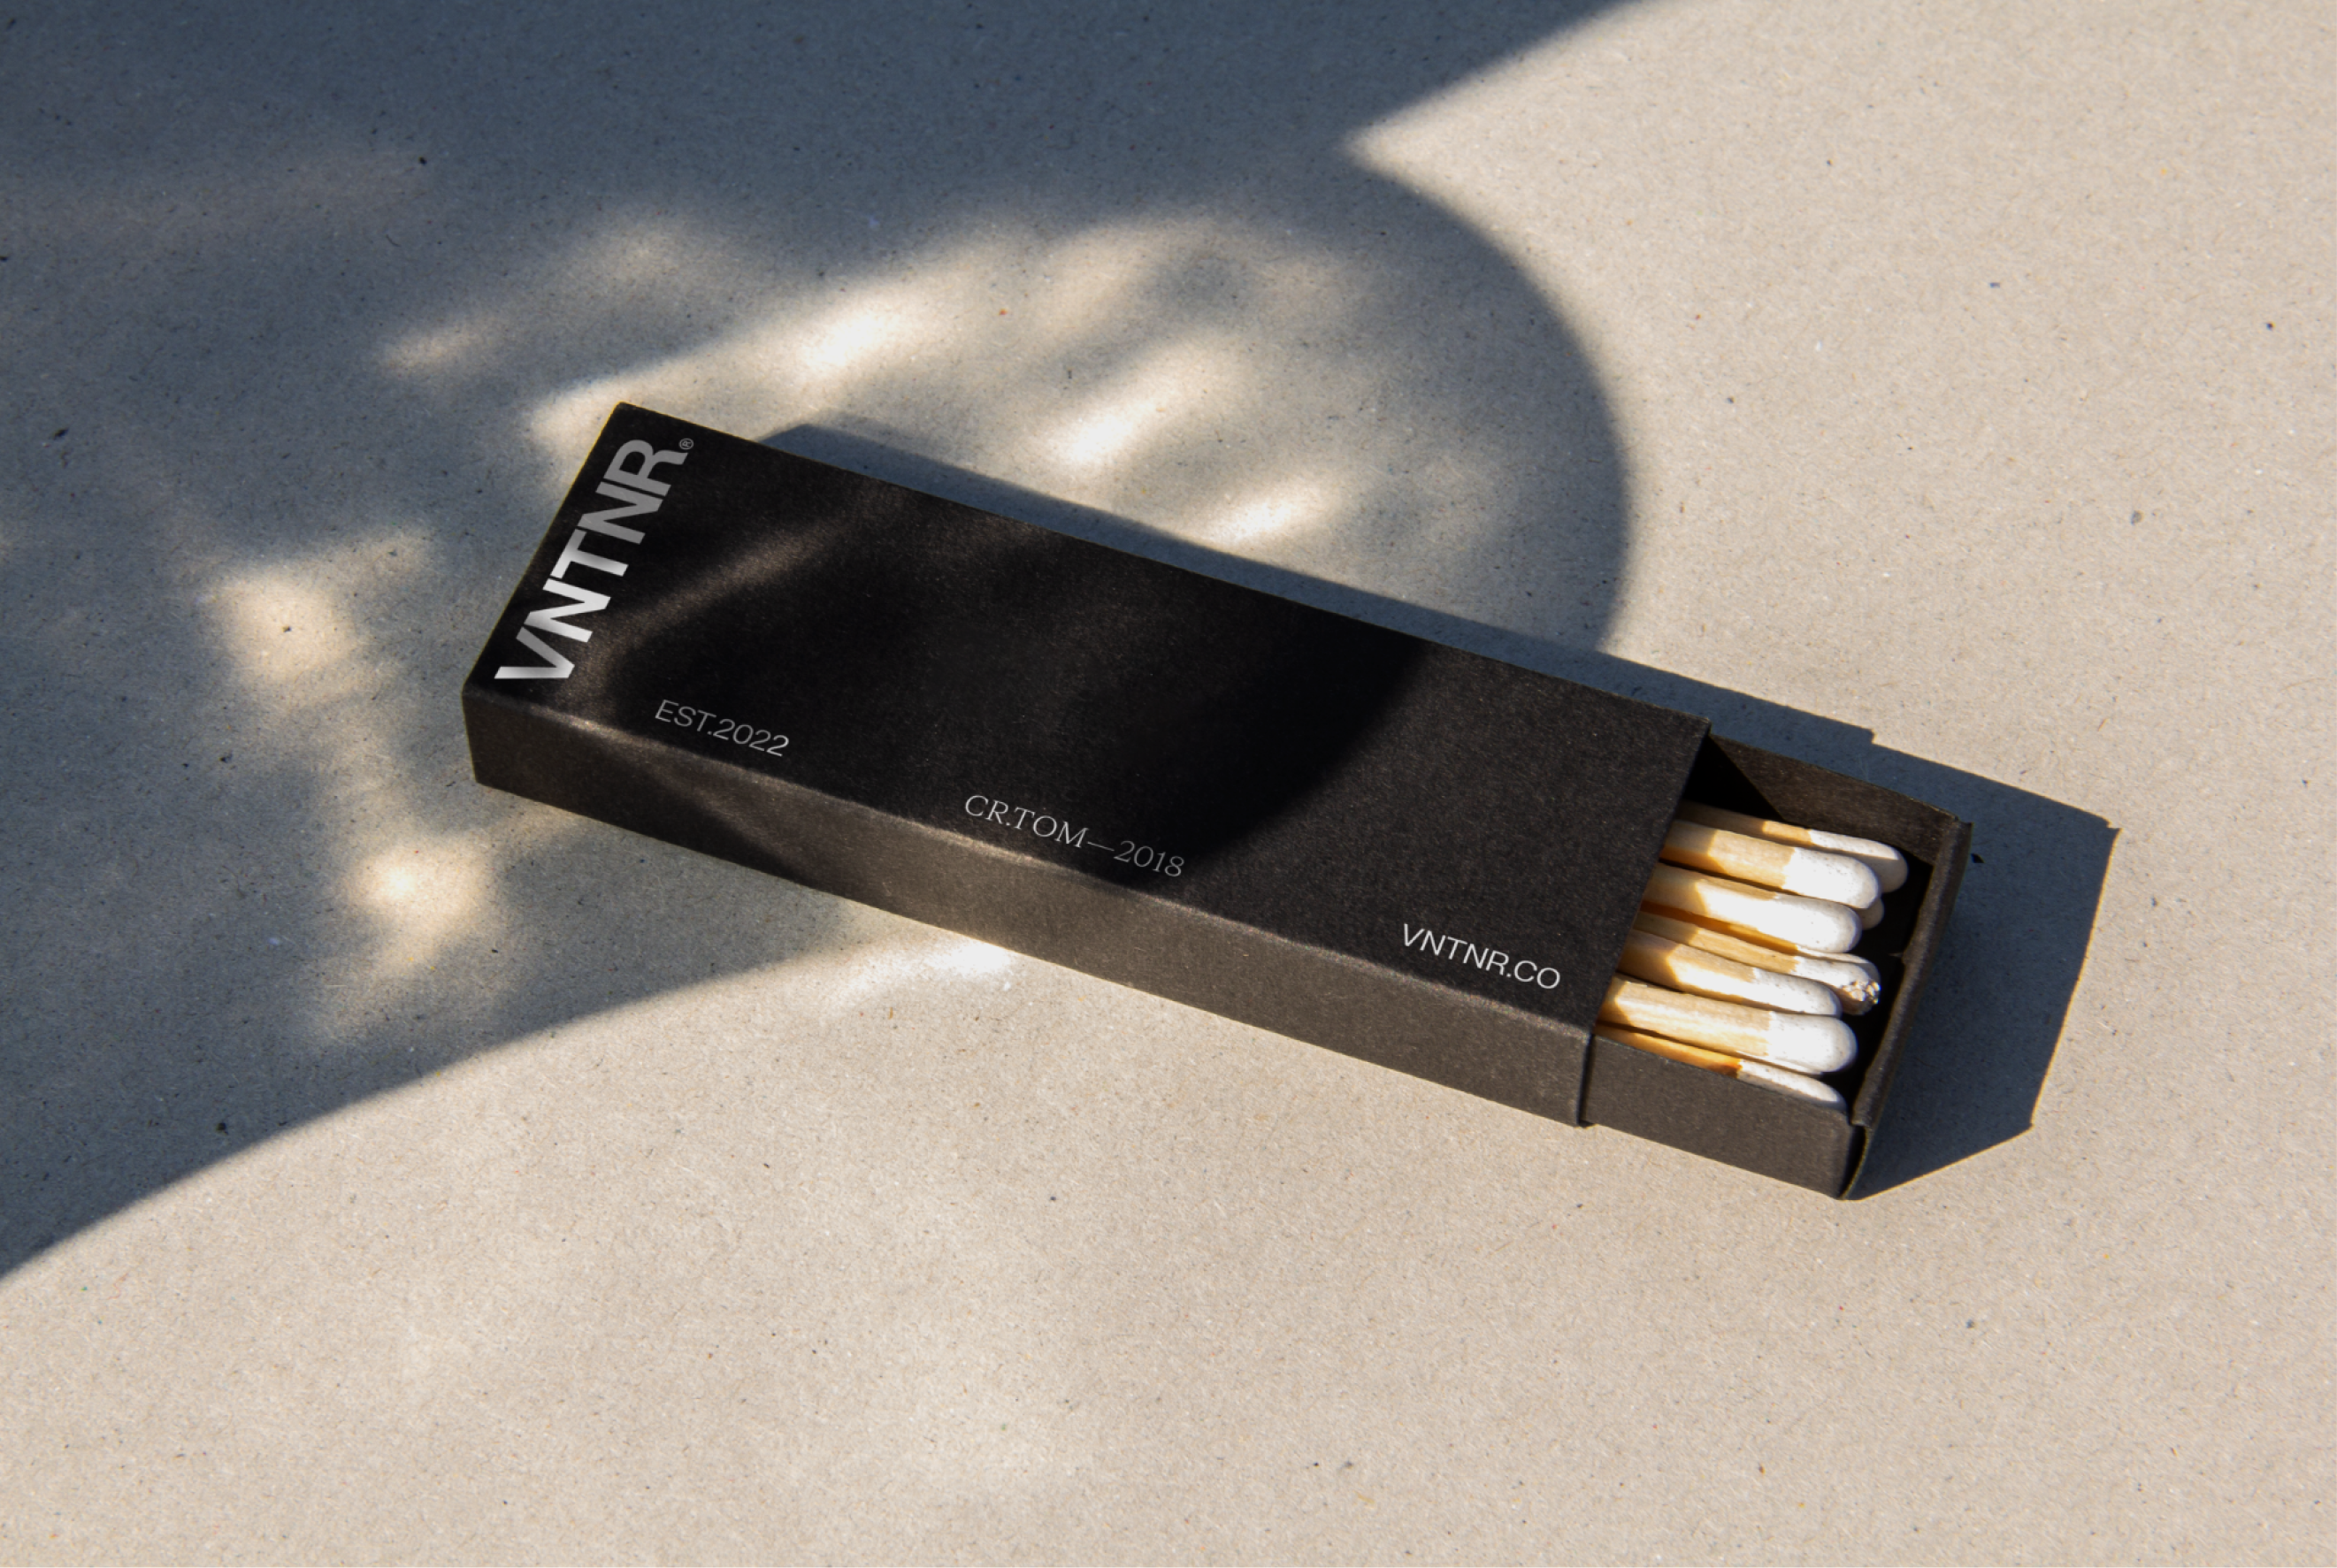 VNTNR branding on a black box of matches with white text